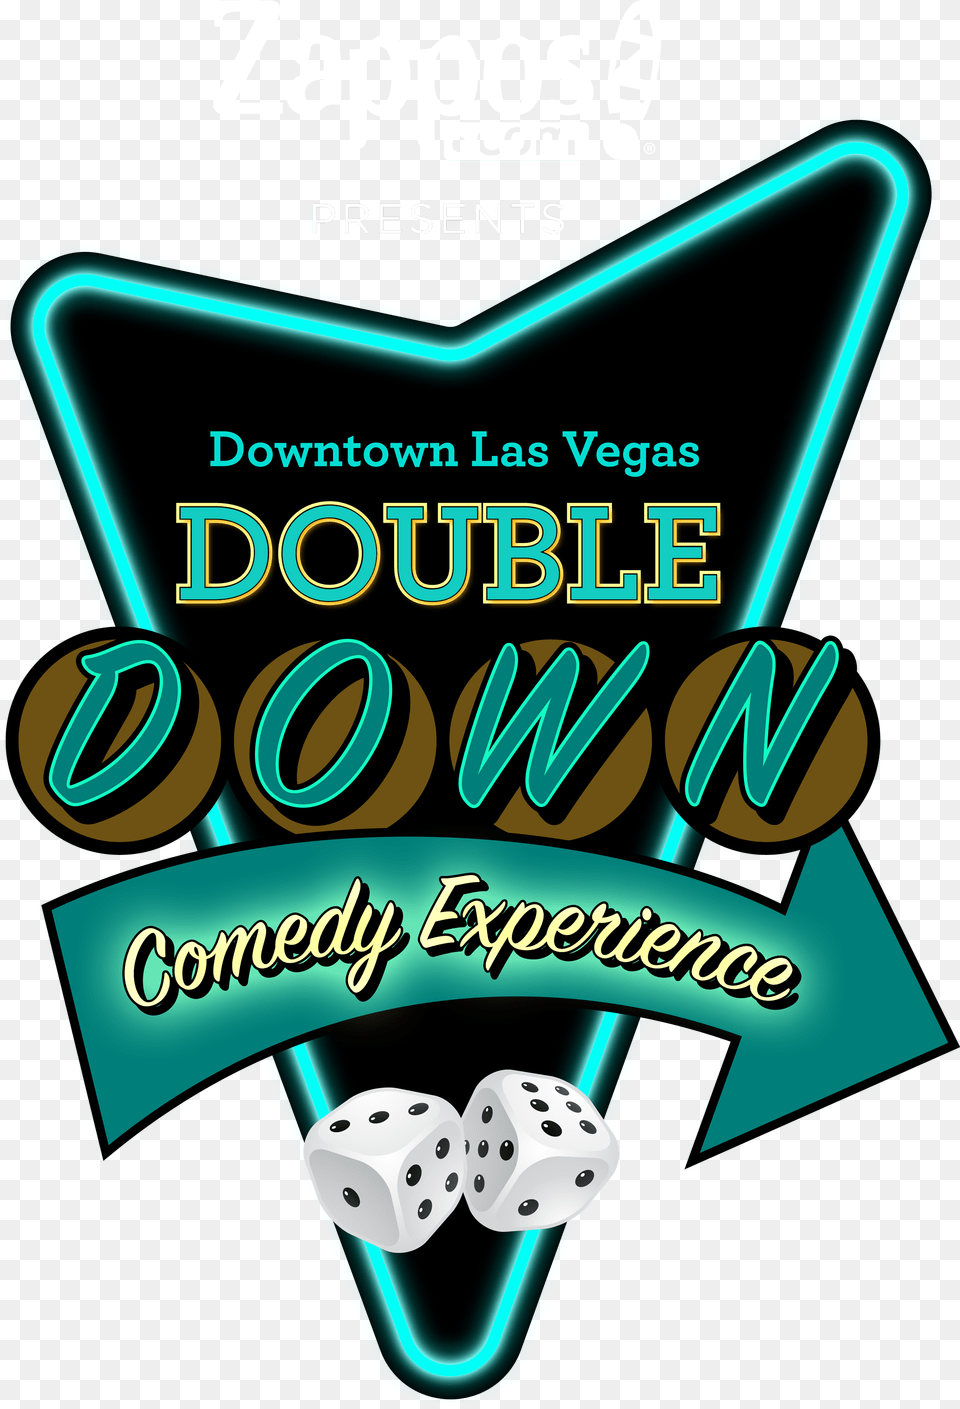 Dowble Down Comedy Logo Graphic Design, Advertisement, Poster Png